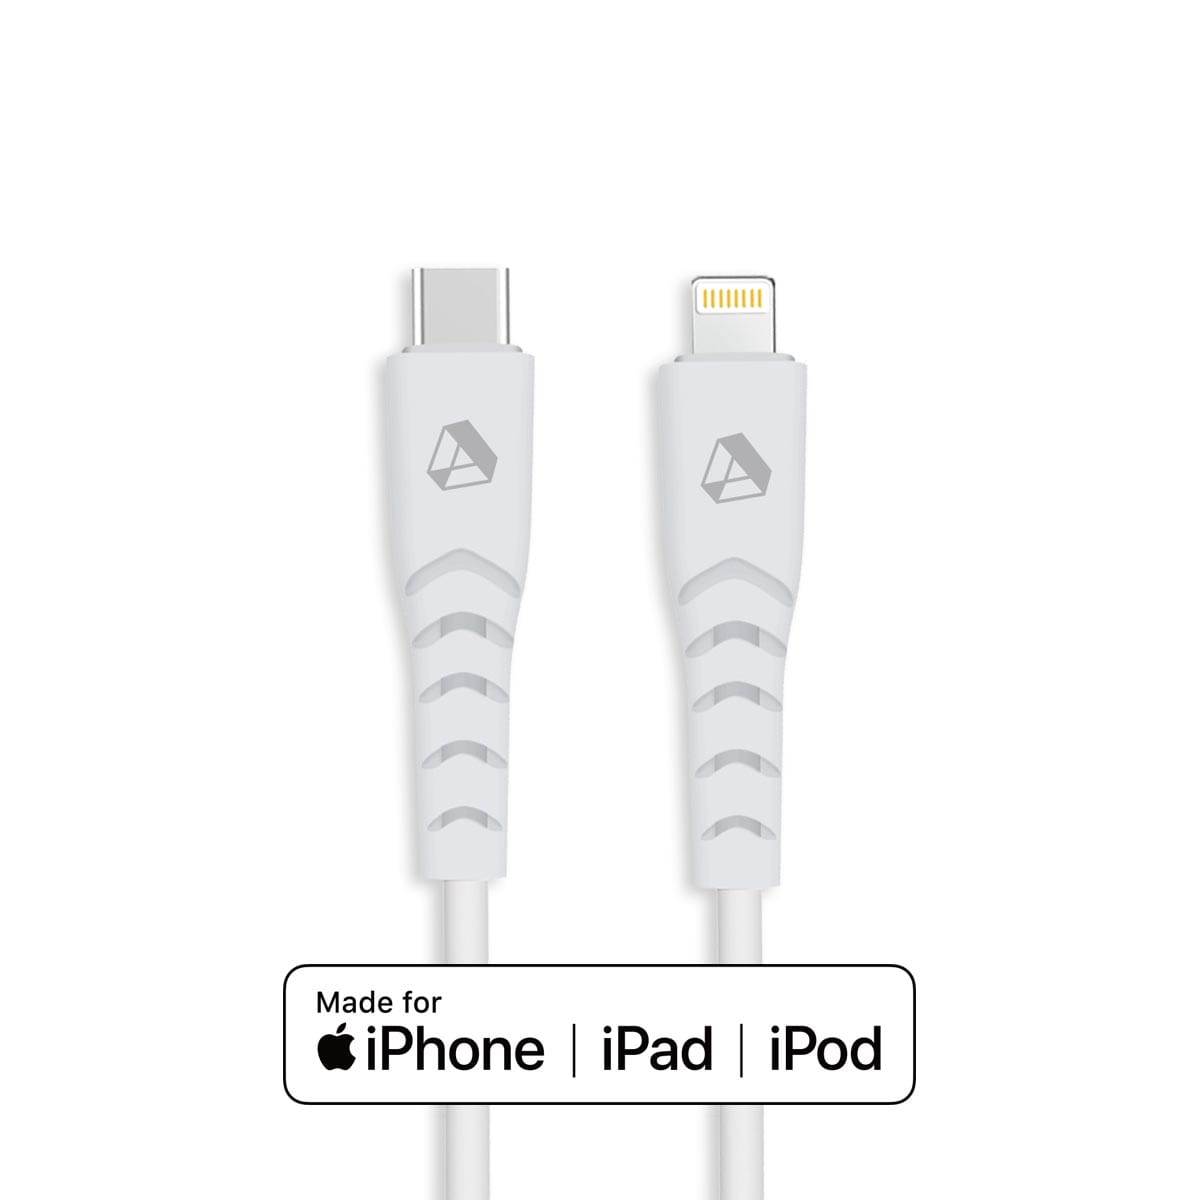 Go Green with Adreama's Eco-friendly 1.5m Lightning to USB-C Cable